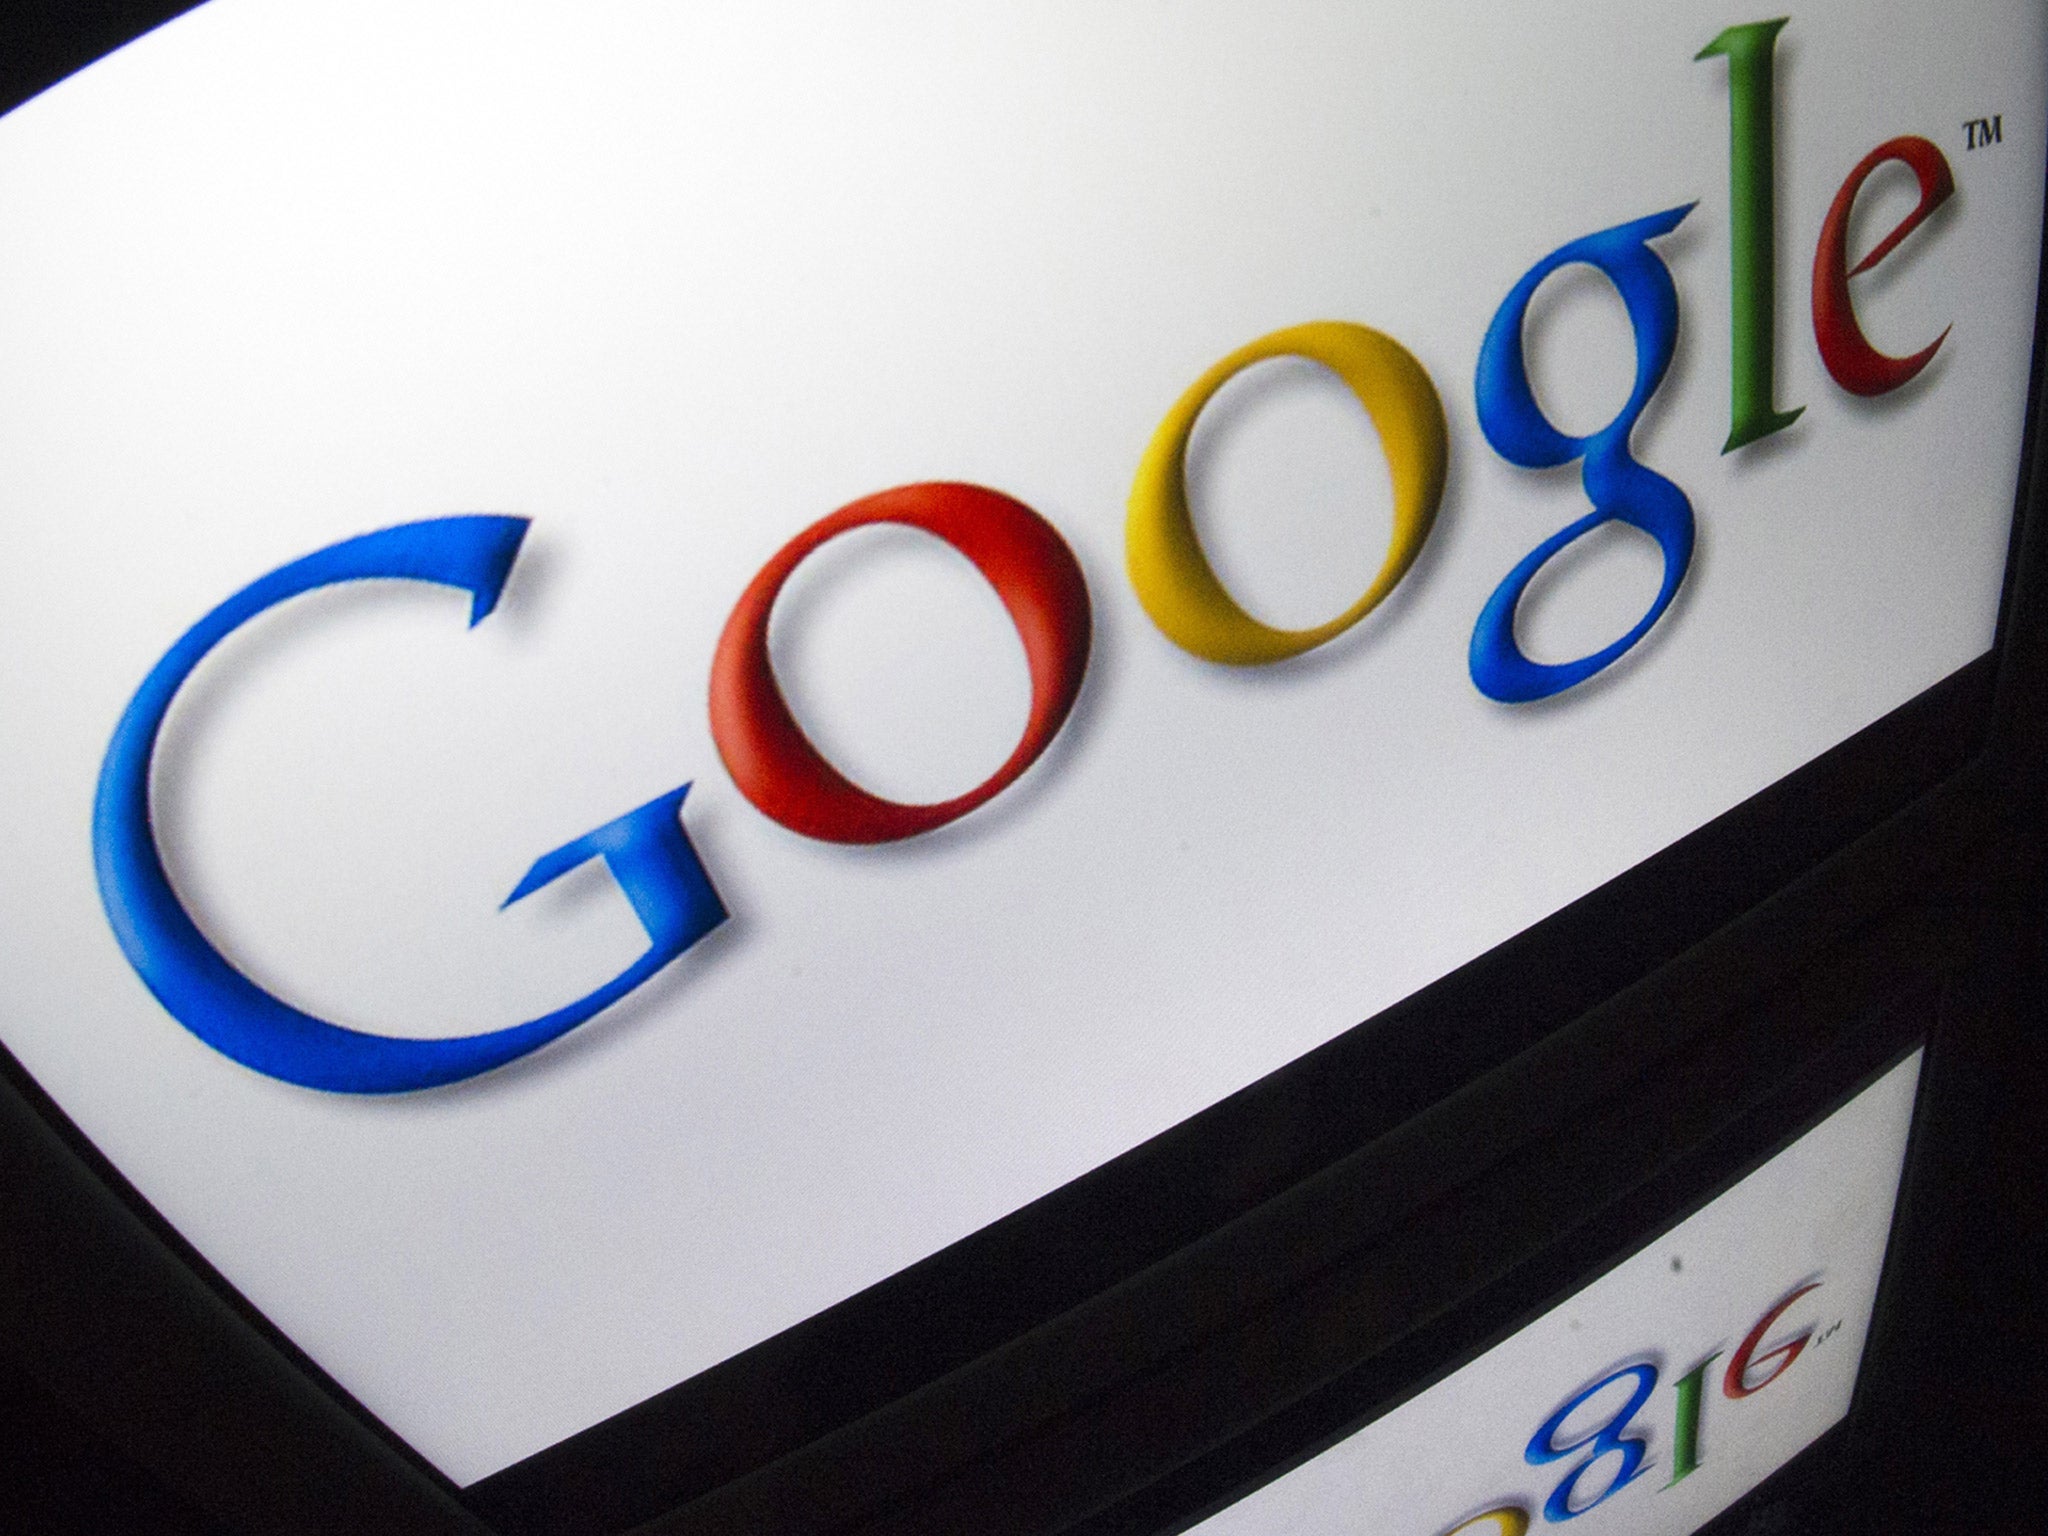 Google say the scanning of emails is common industry practice